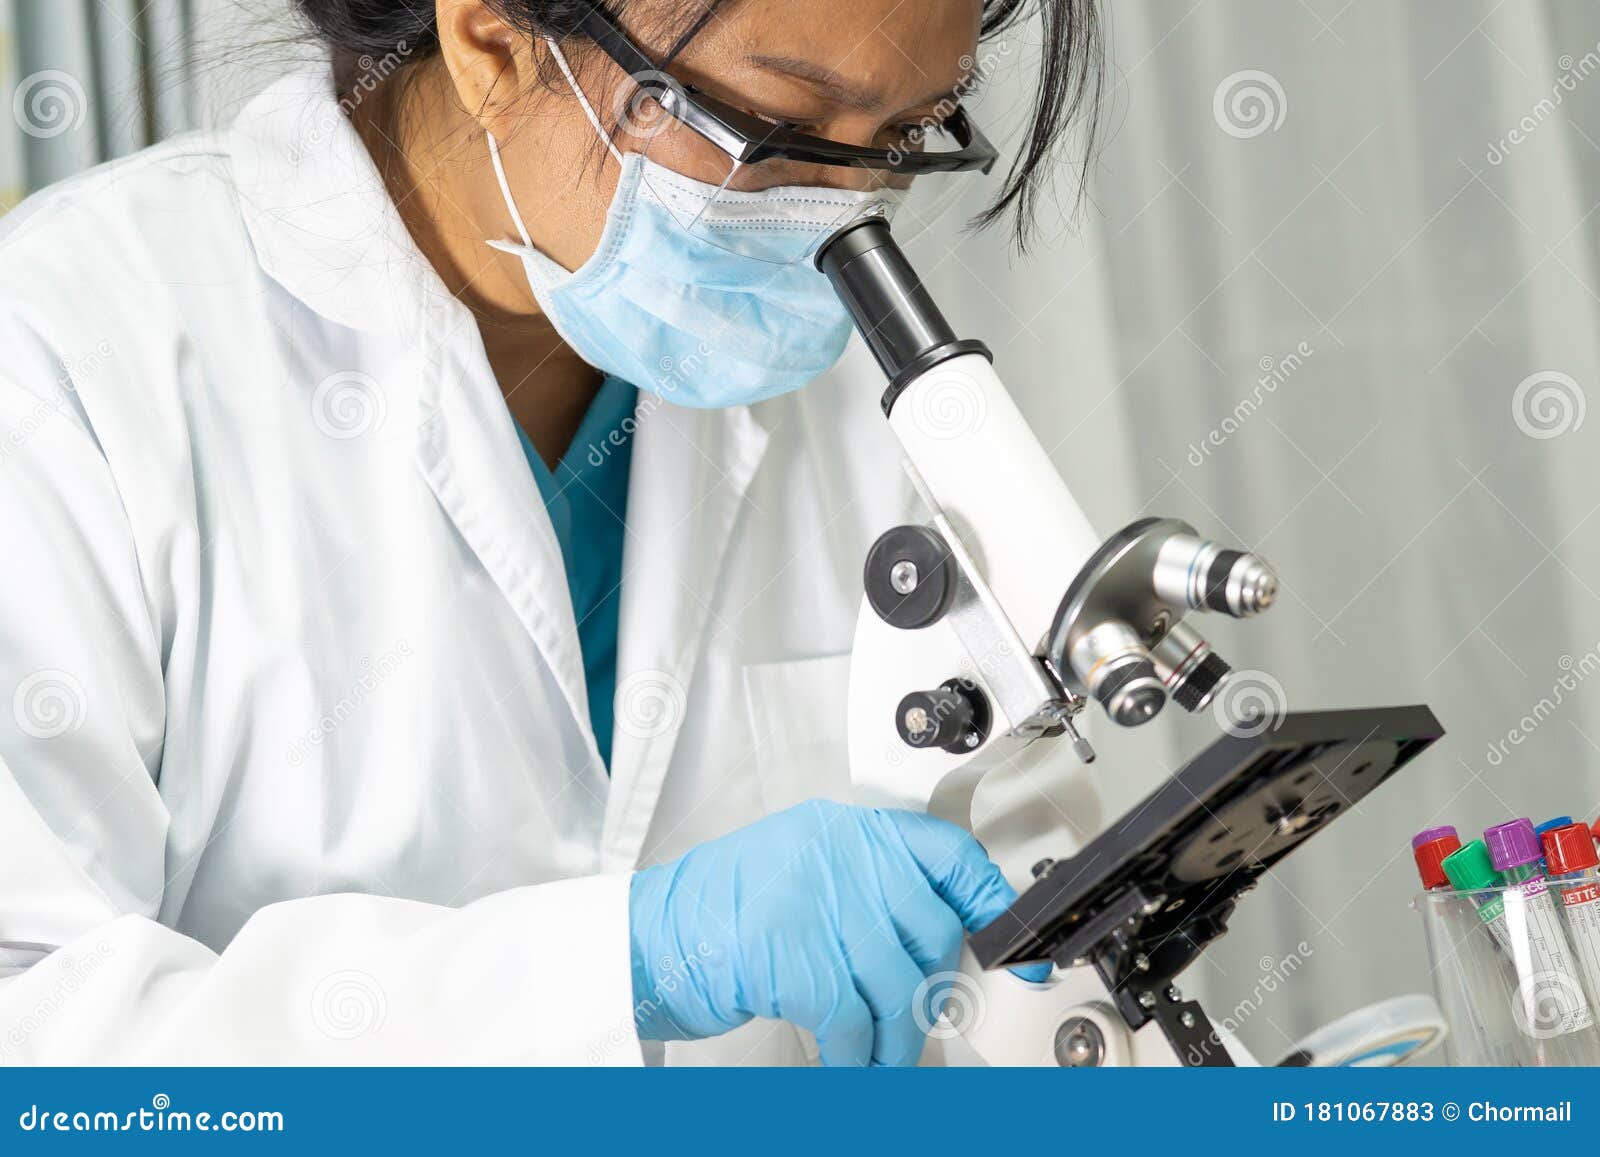 asian scientist biochemist or microbiologist working research with a microscope in laboratory.